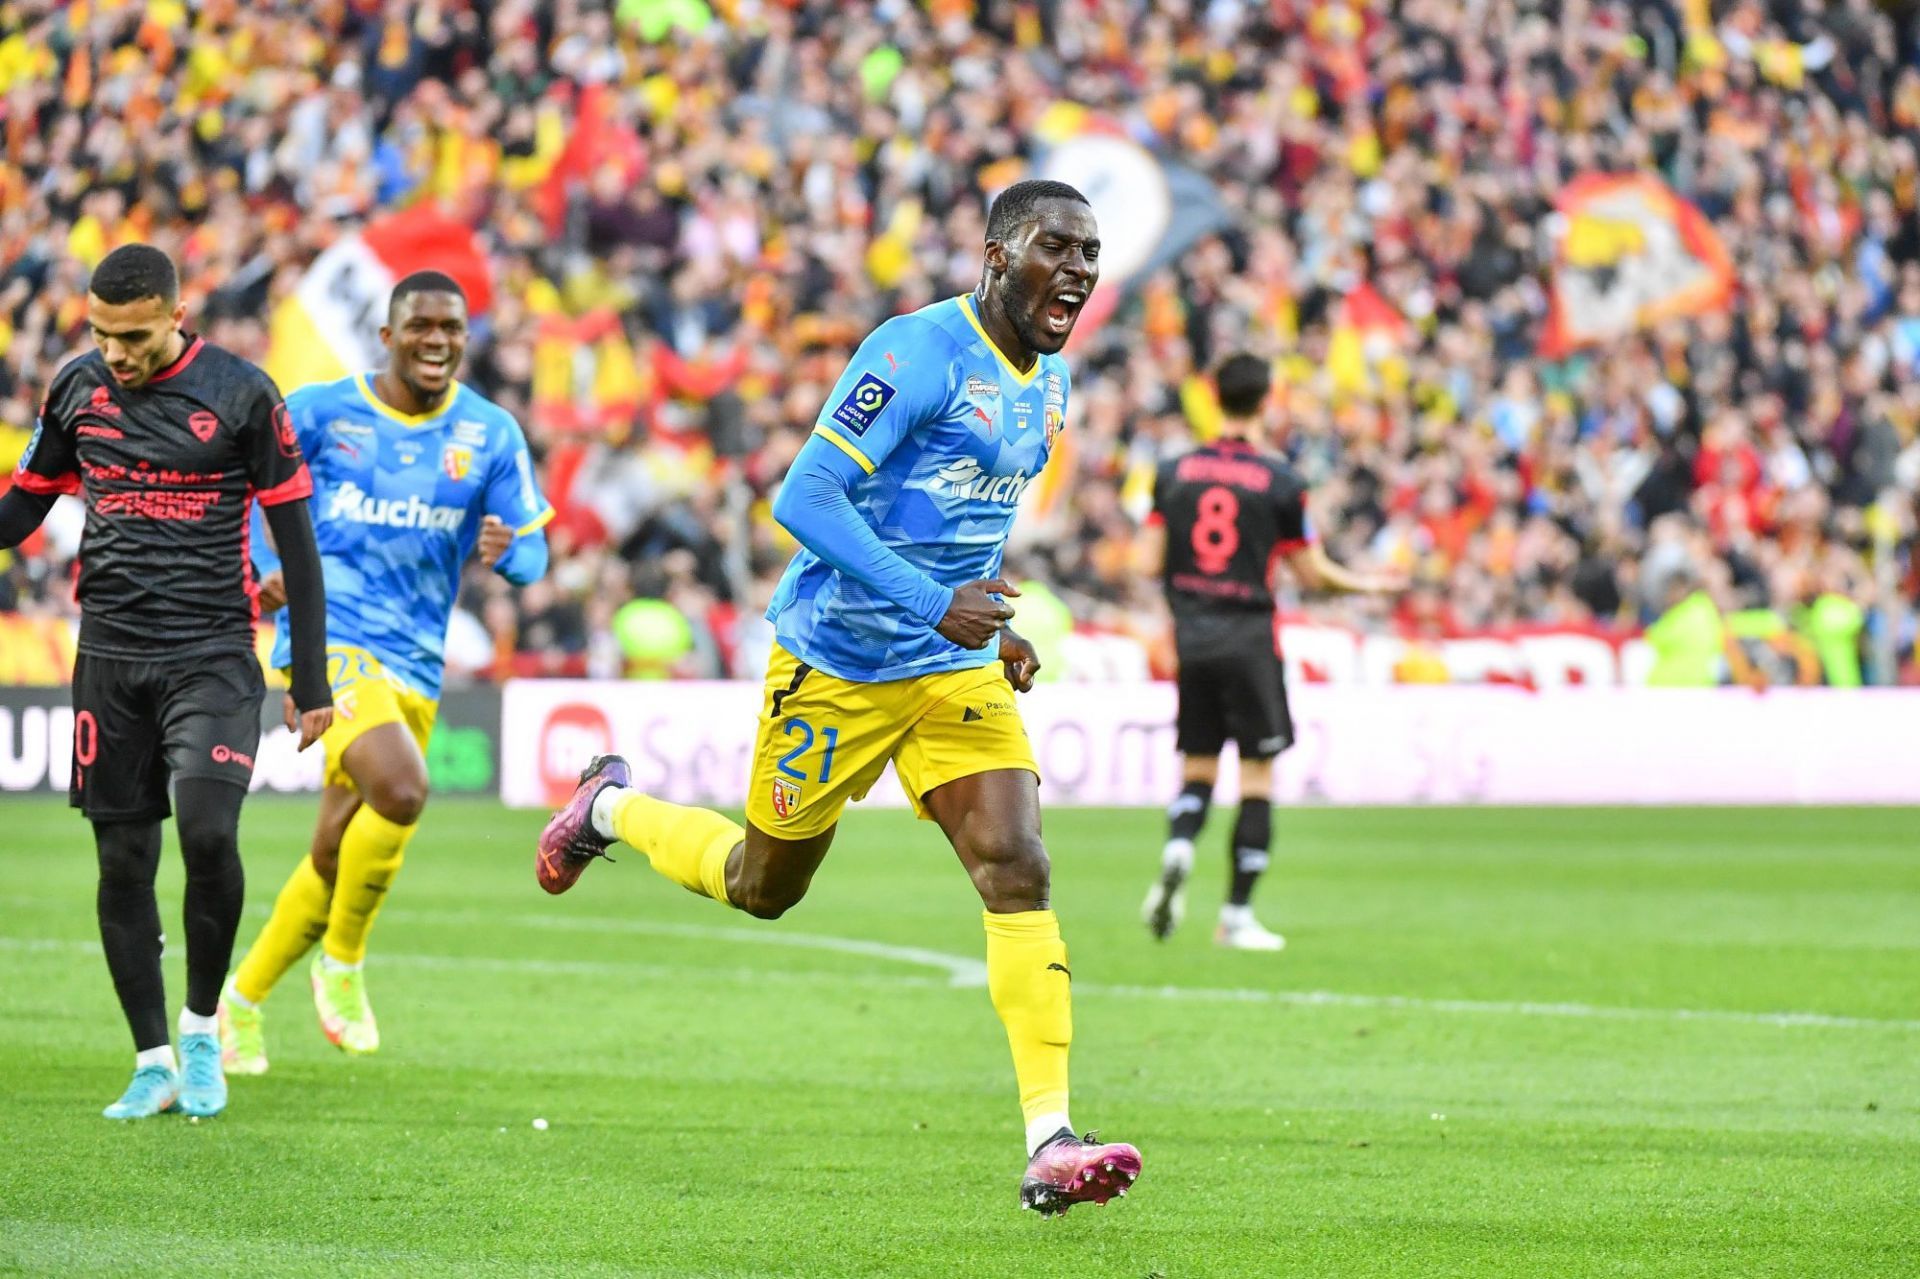 Lens and Clermont Foot square off in Ligue 1 on Saturday (Image Credits: Sport.fr)